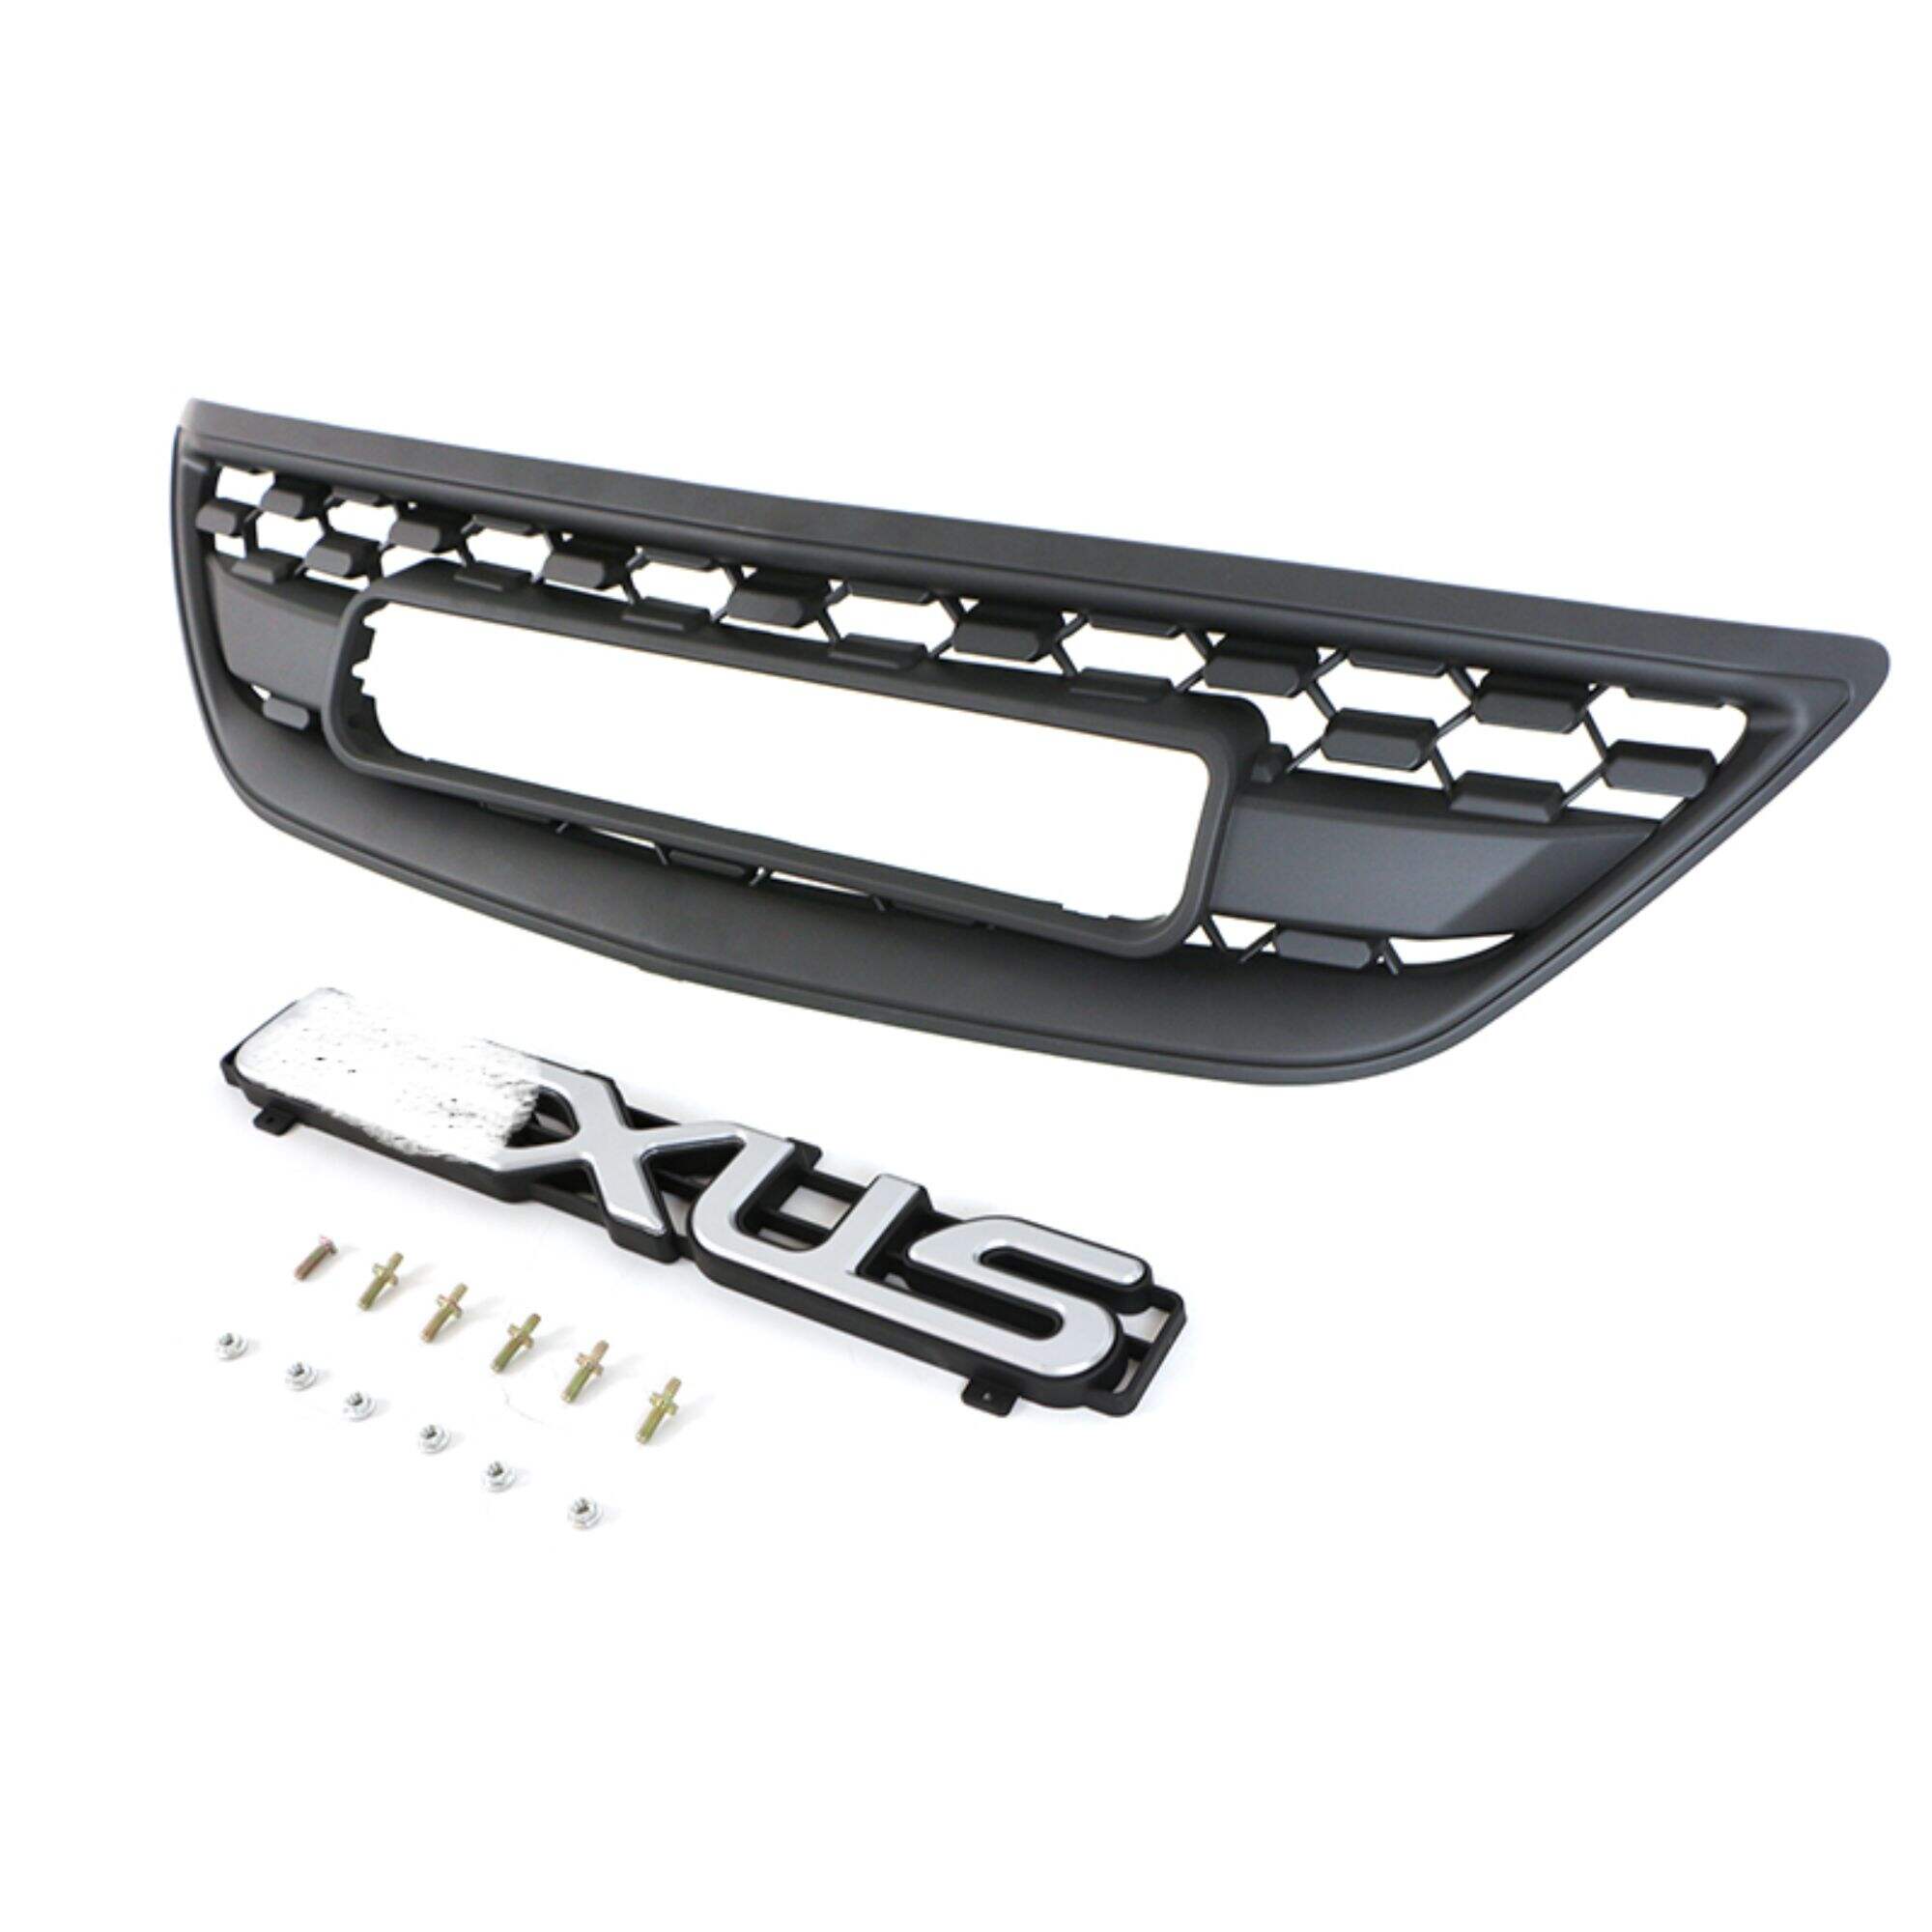  ABS Front Grille With Light Fit For Lexus RX350 330 2004 2009